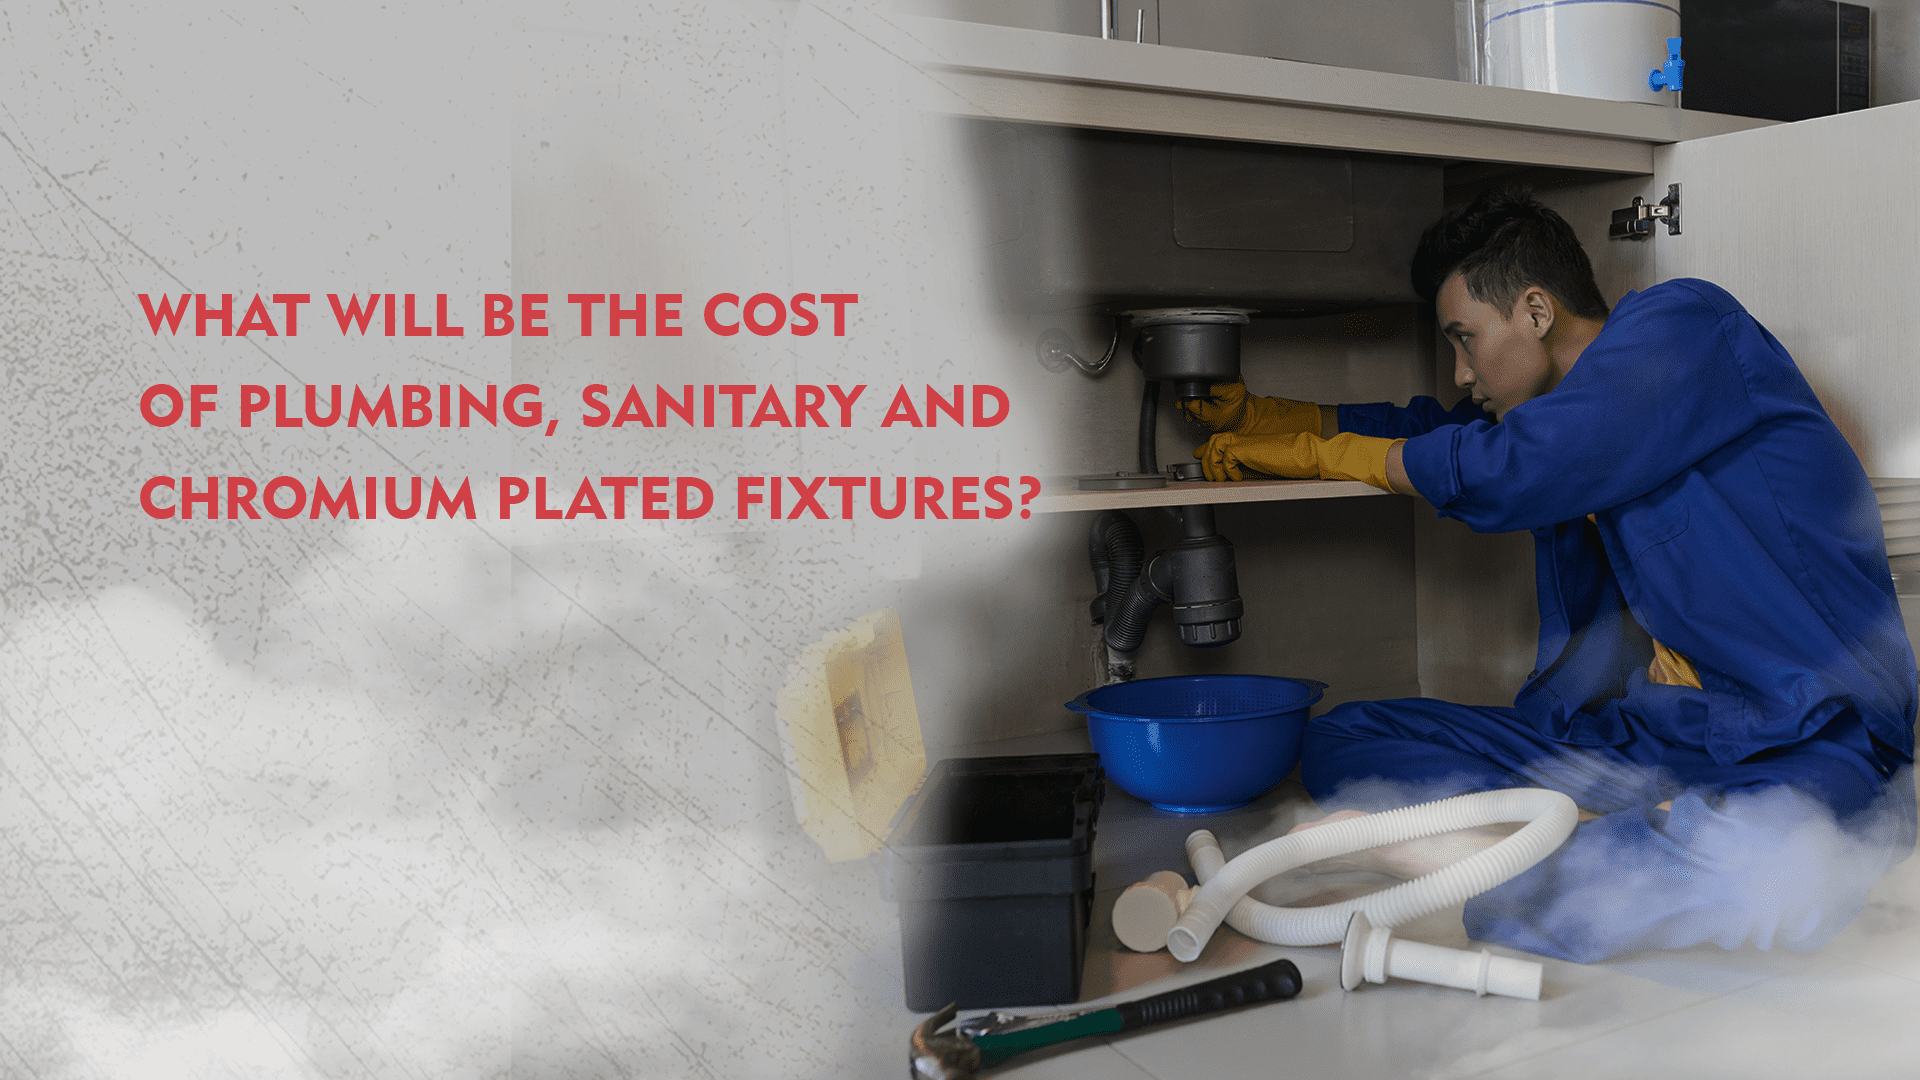 Explore the Average Cost of Fixtures for plumbing, sanitary, and chromium plated options. Budget wisely for your home improvement projects. What is the Average Cost of Plumbing, Sanitary, and Chromium Plated Fixtures?